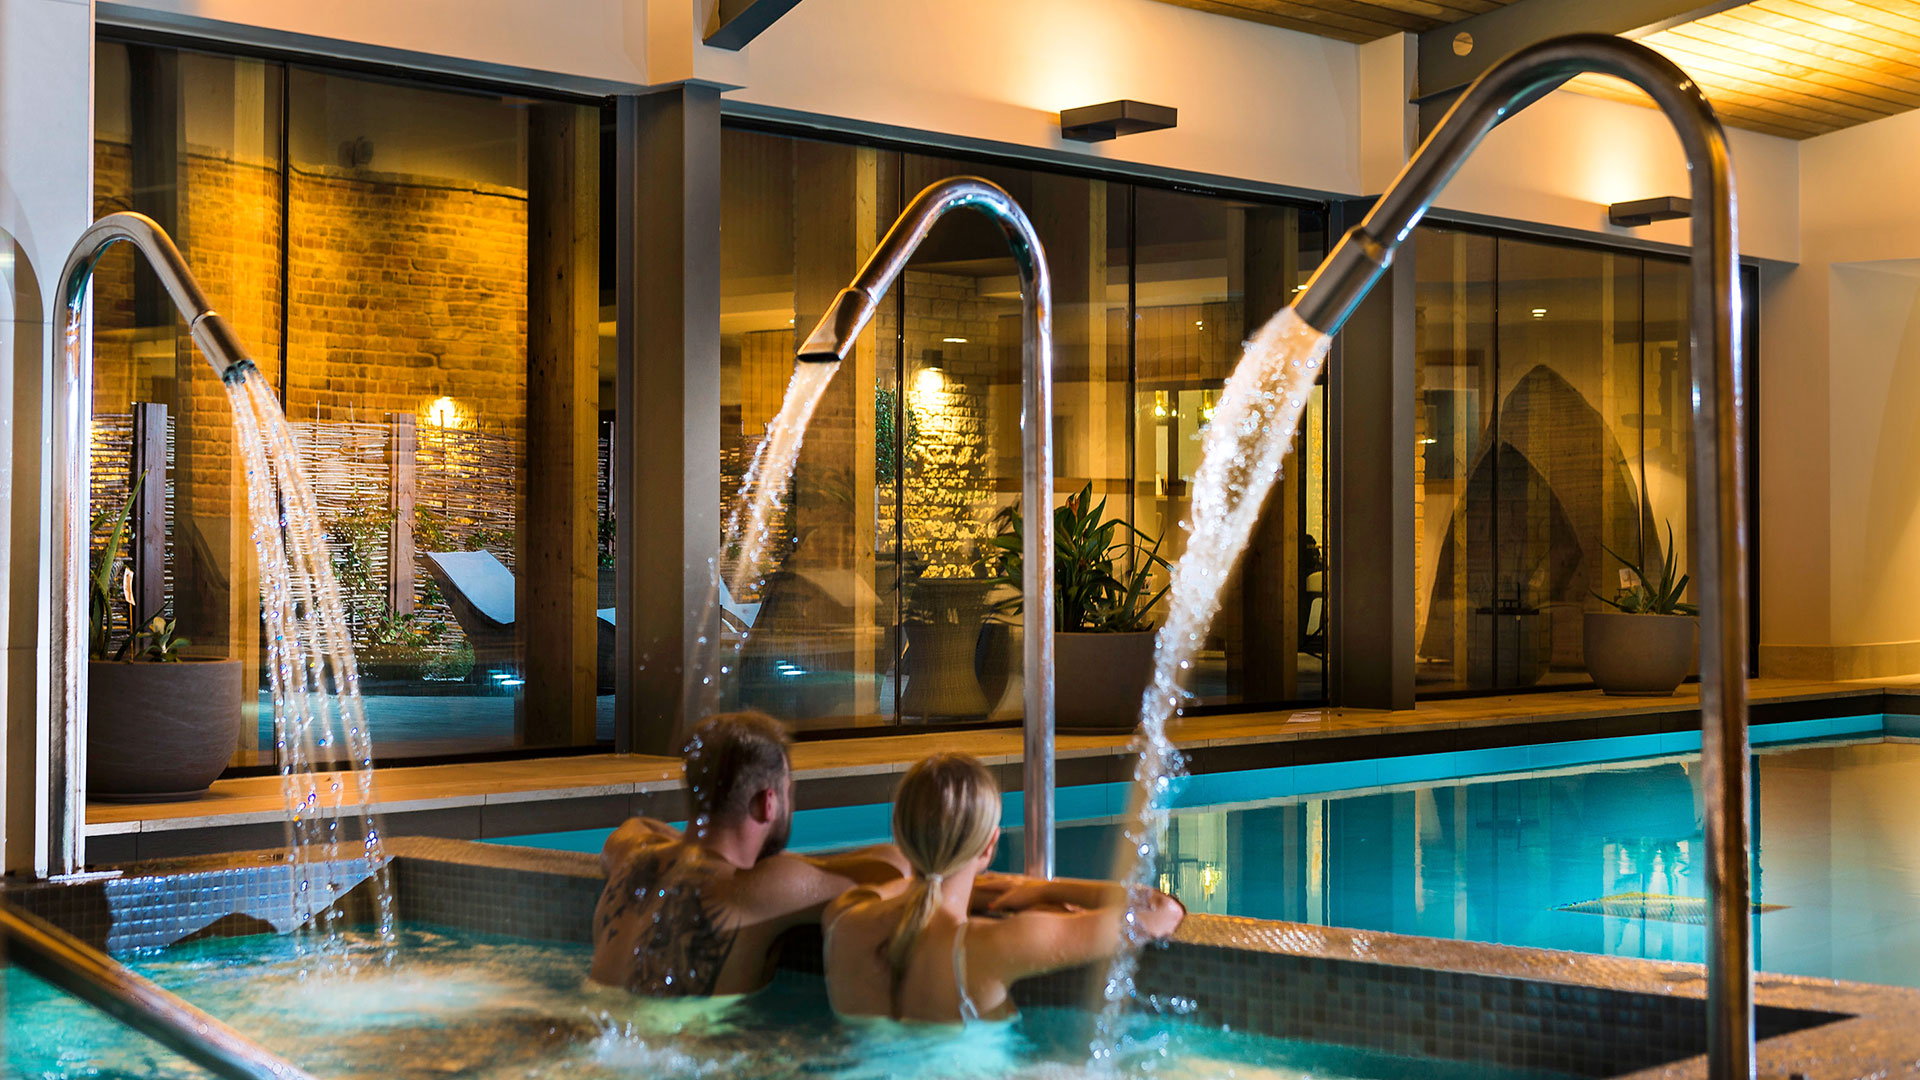 A couple relaxing in the Vitality pool with water jets - Hatherley Manor Hotel & Spa, Cotswolds